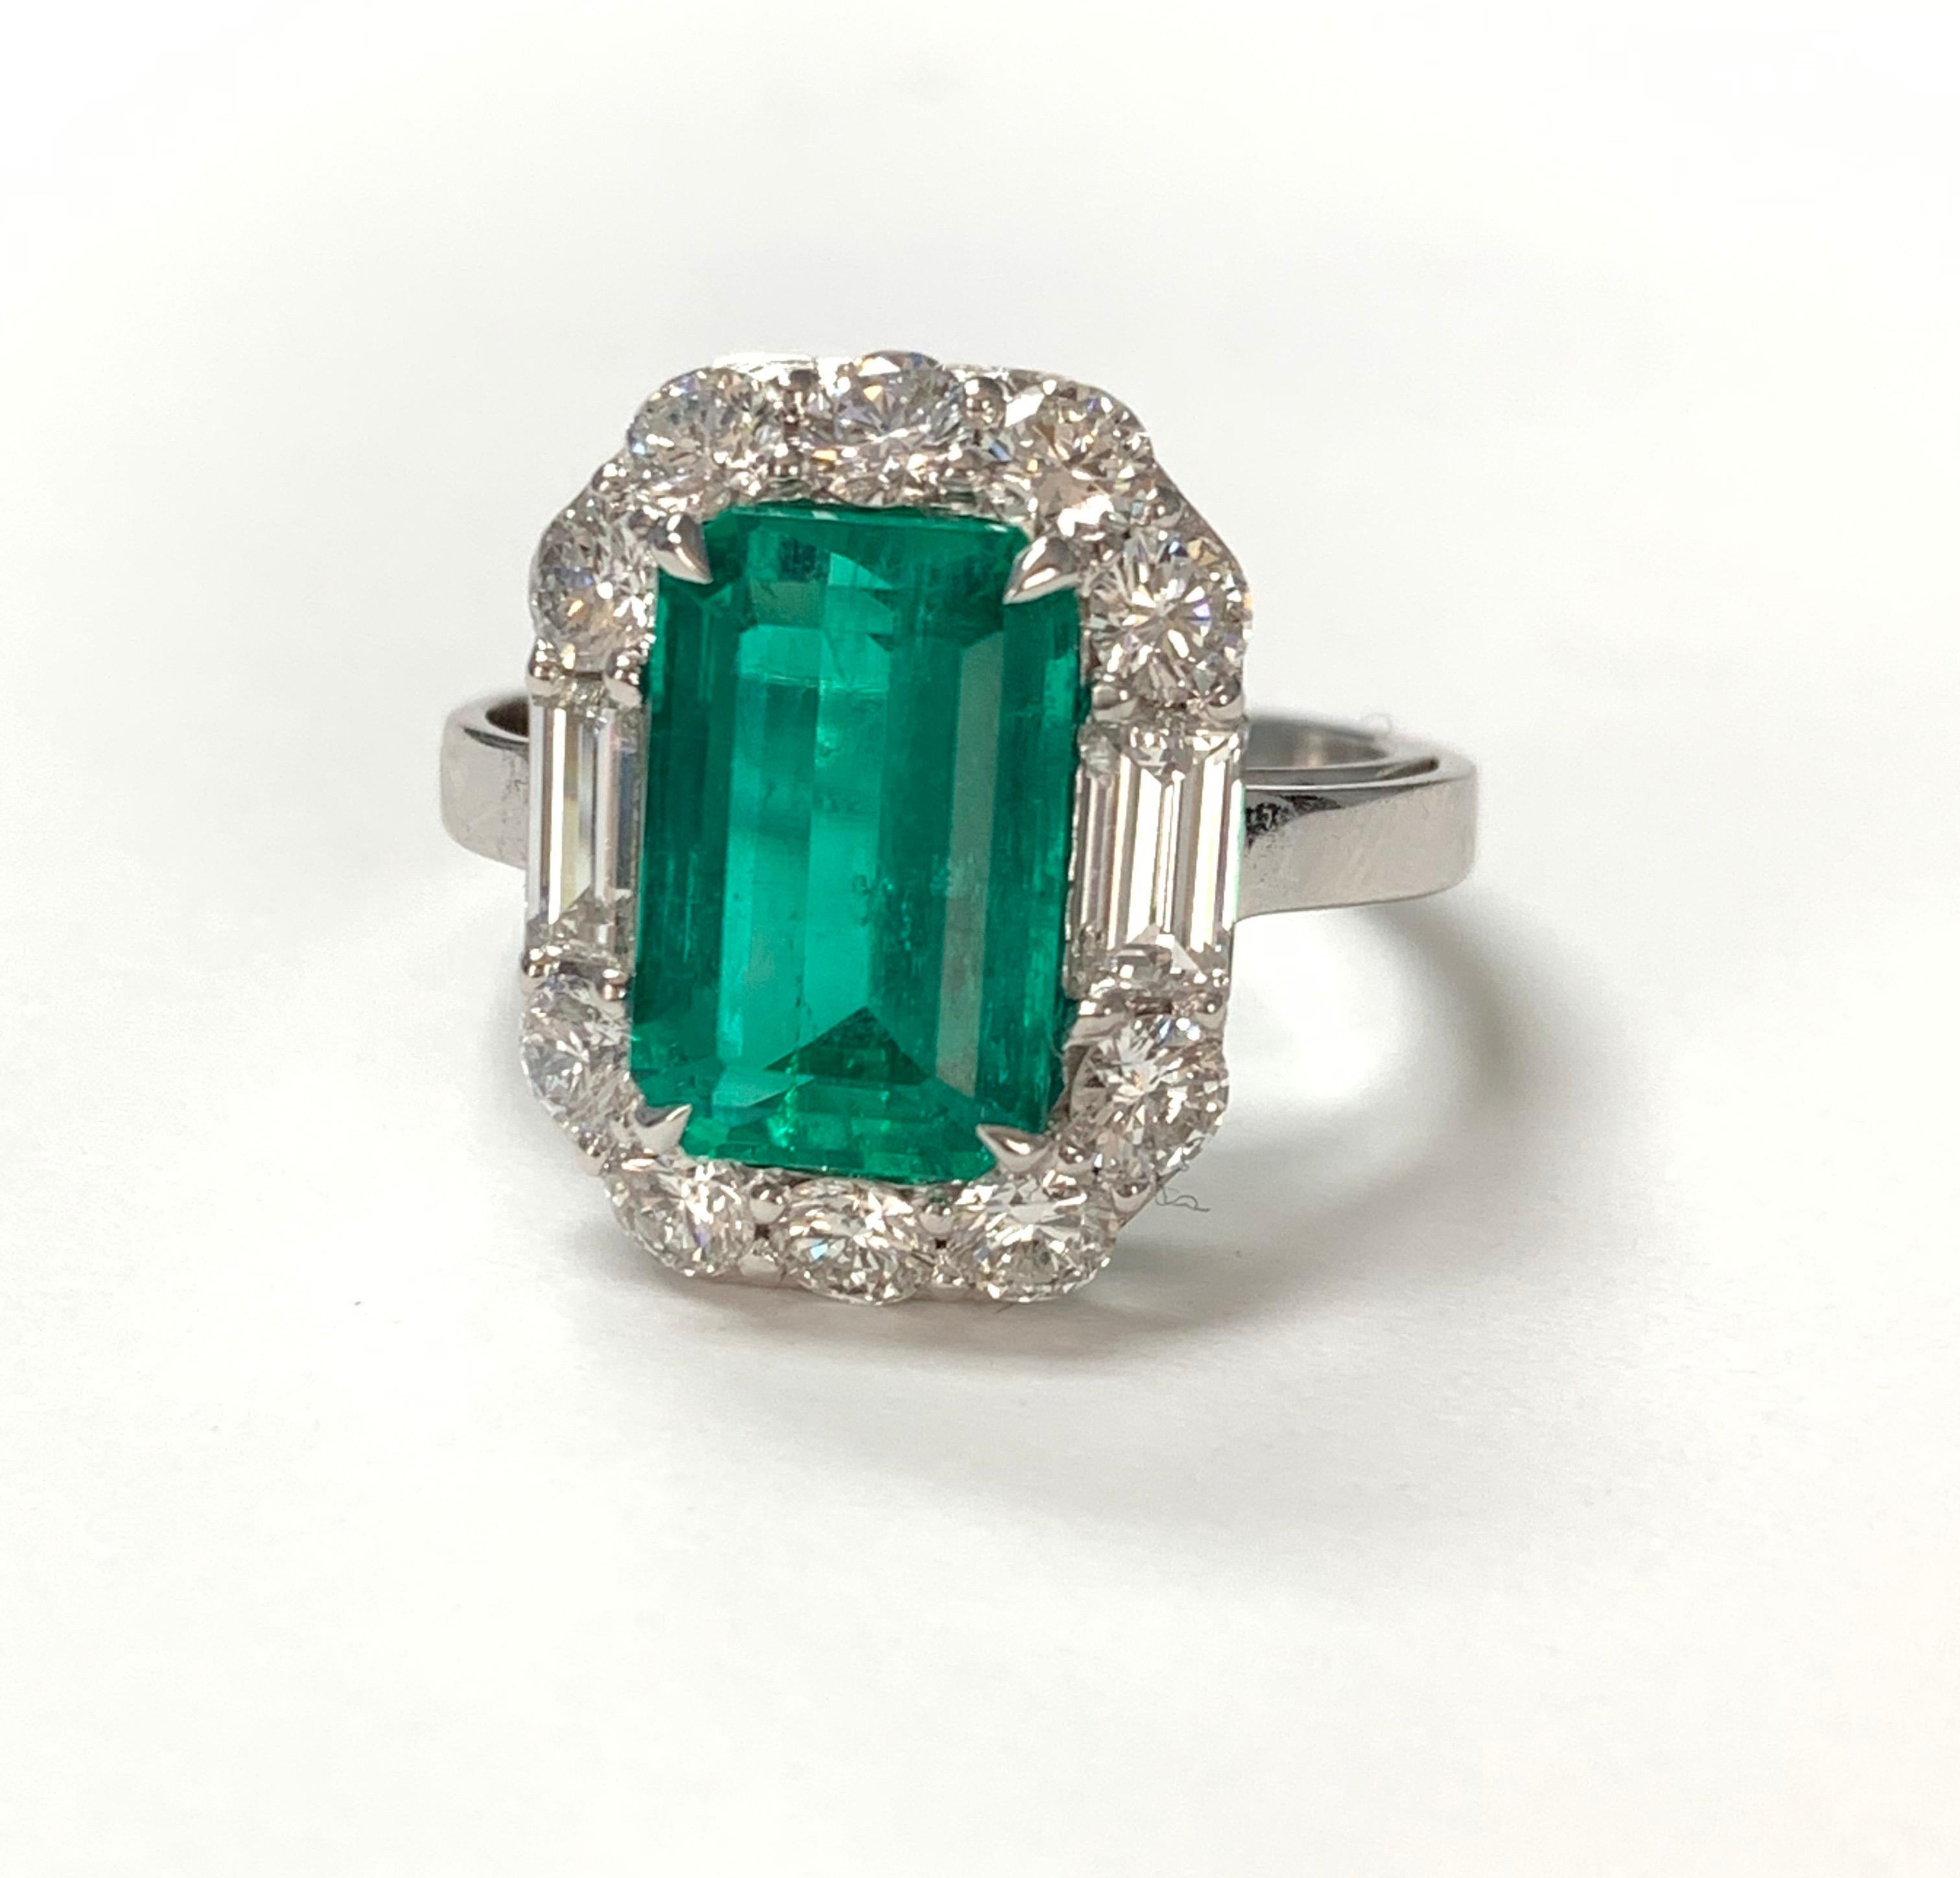 GIA Certified Gorgeously Green Colombian emerald cut emerald and diamond ring hand crafted in 18k white gold. 
The details are as follows : 
Emerald weight : 3.63 Carat 
Diamond weight : 
Baguette diamond : 0.65 carat ( GH color and VS clarity )